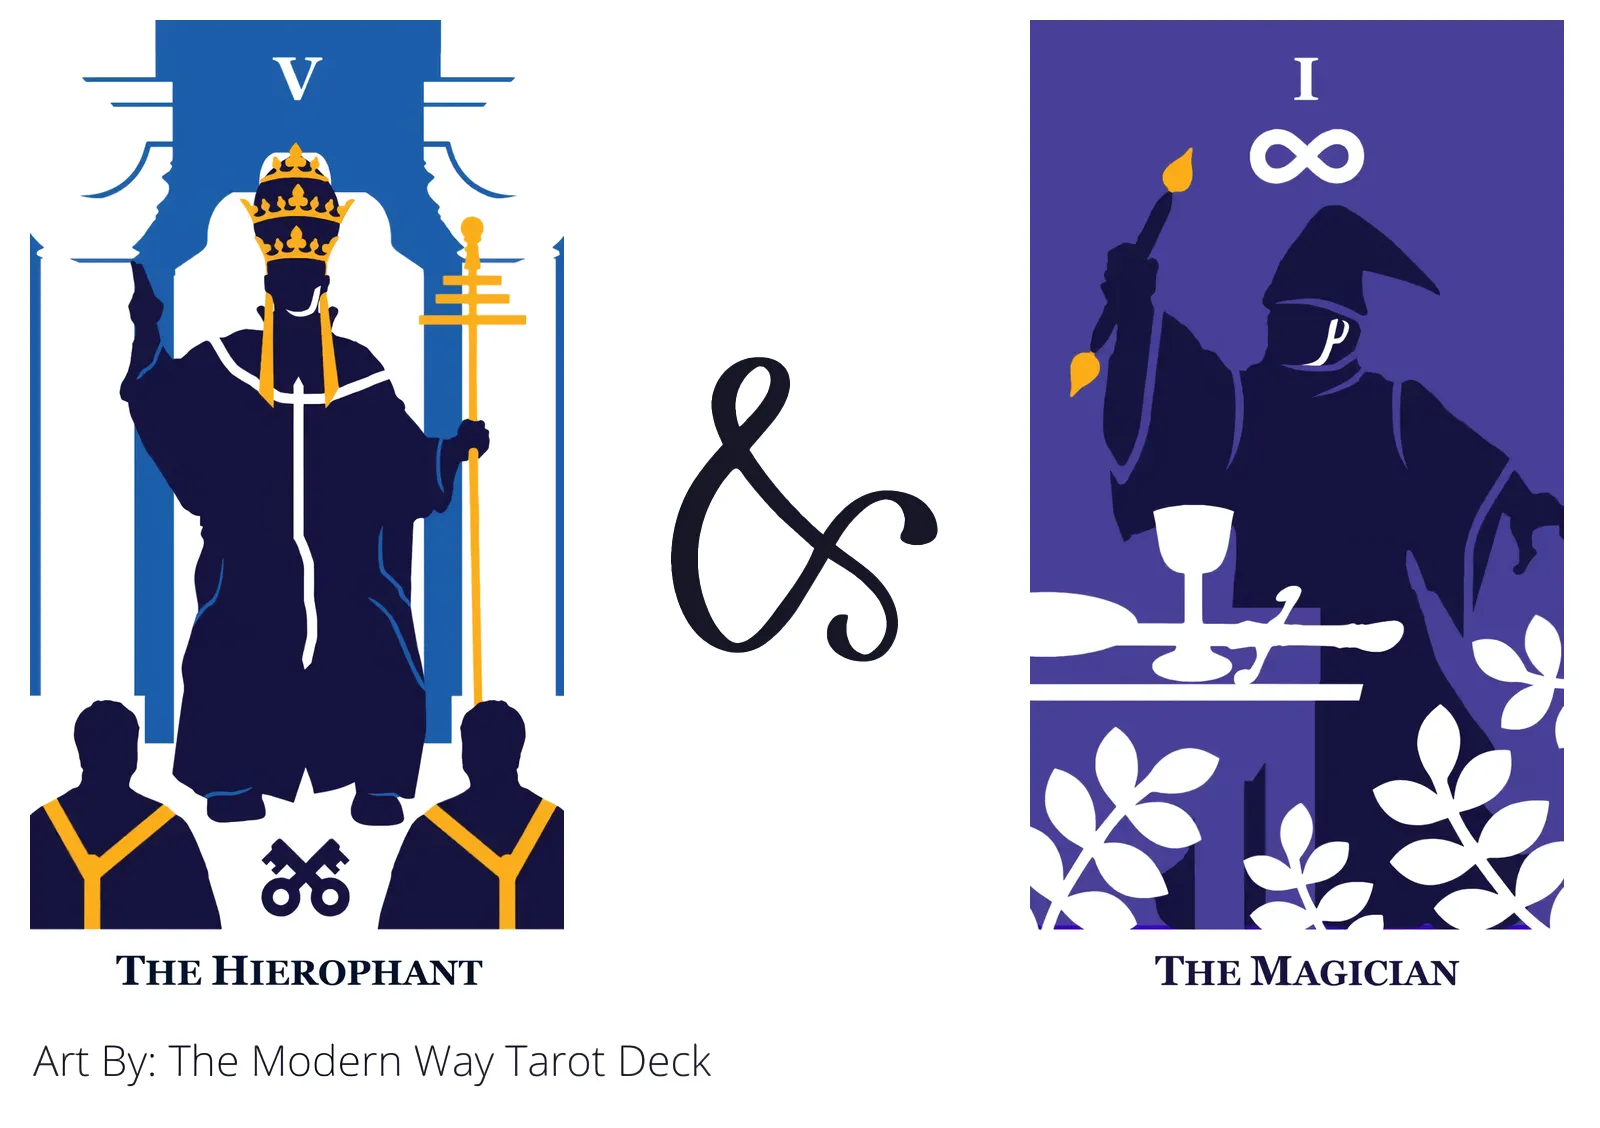 the hierophant and the magician tarot cards together